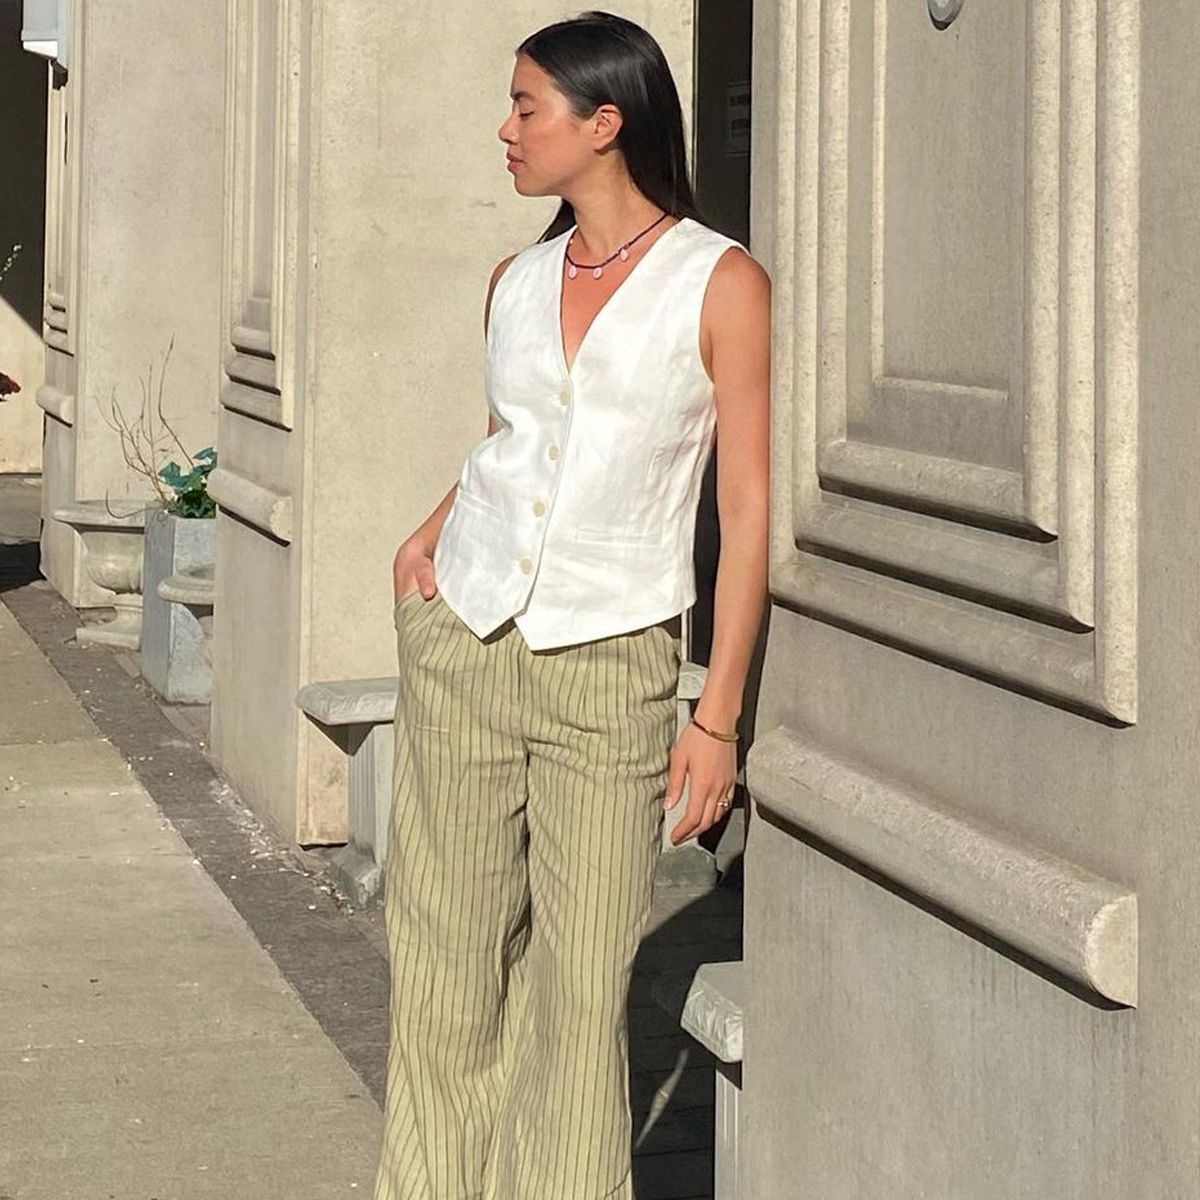 The Most Comfortable Linen Pants in white - ROVE